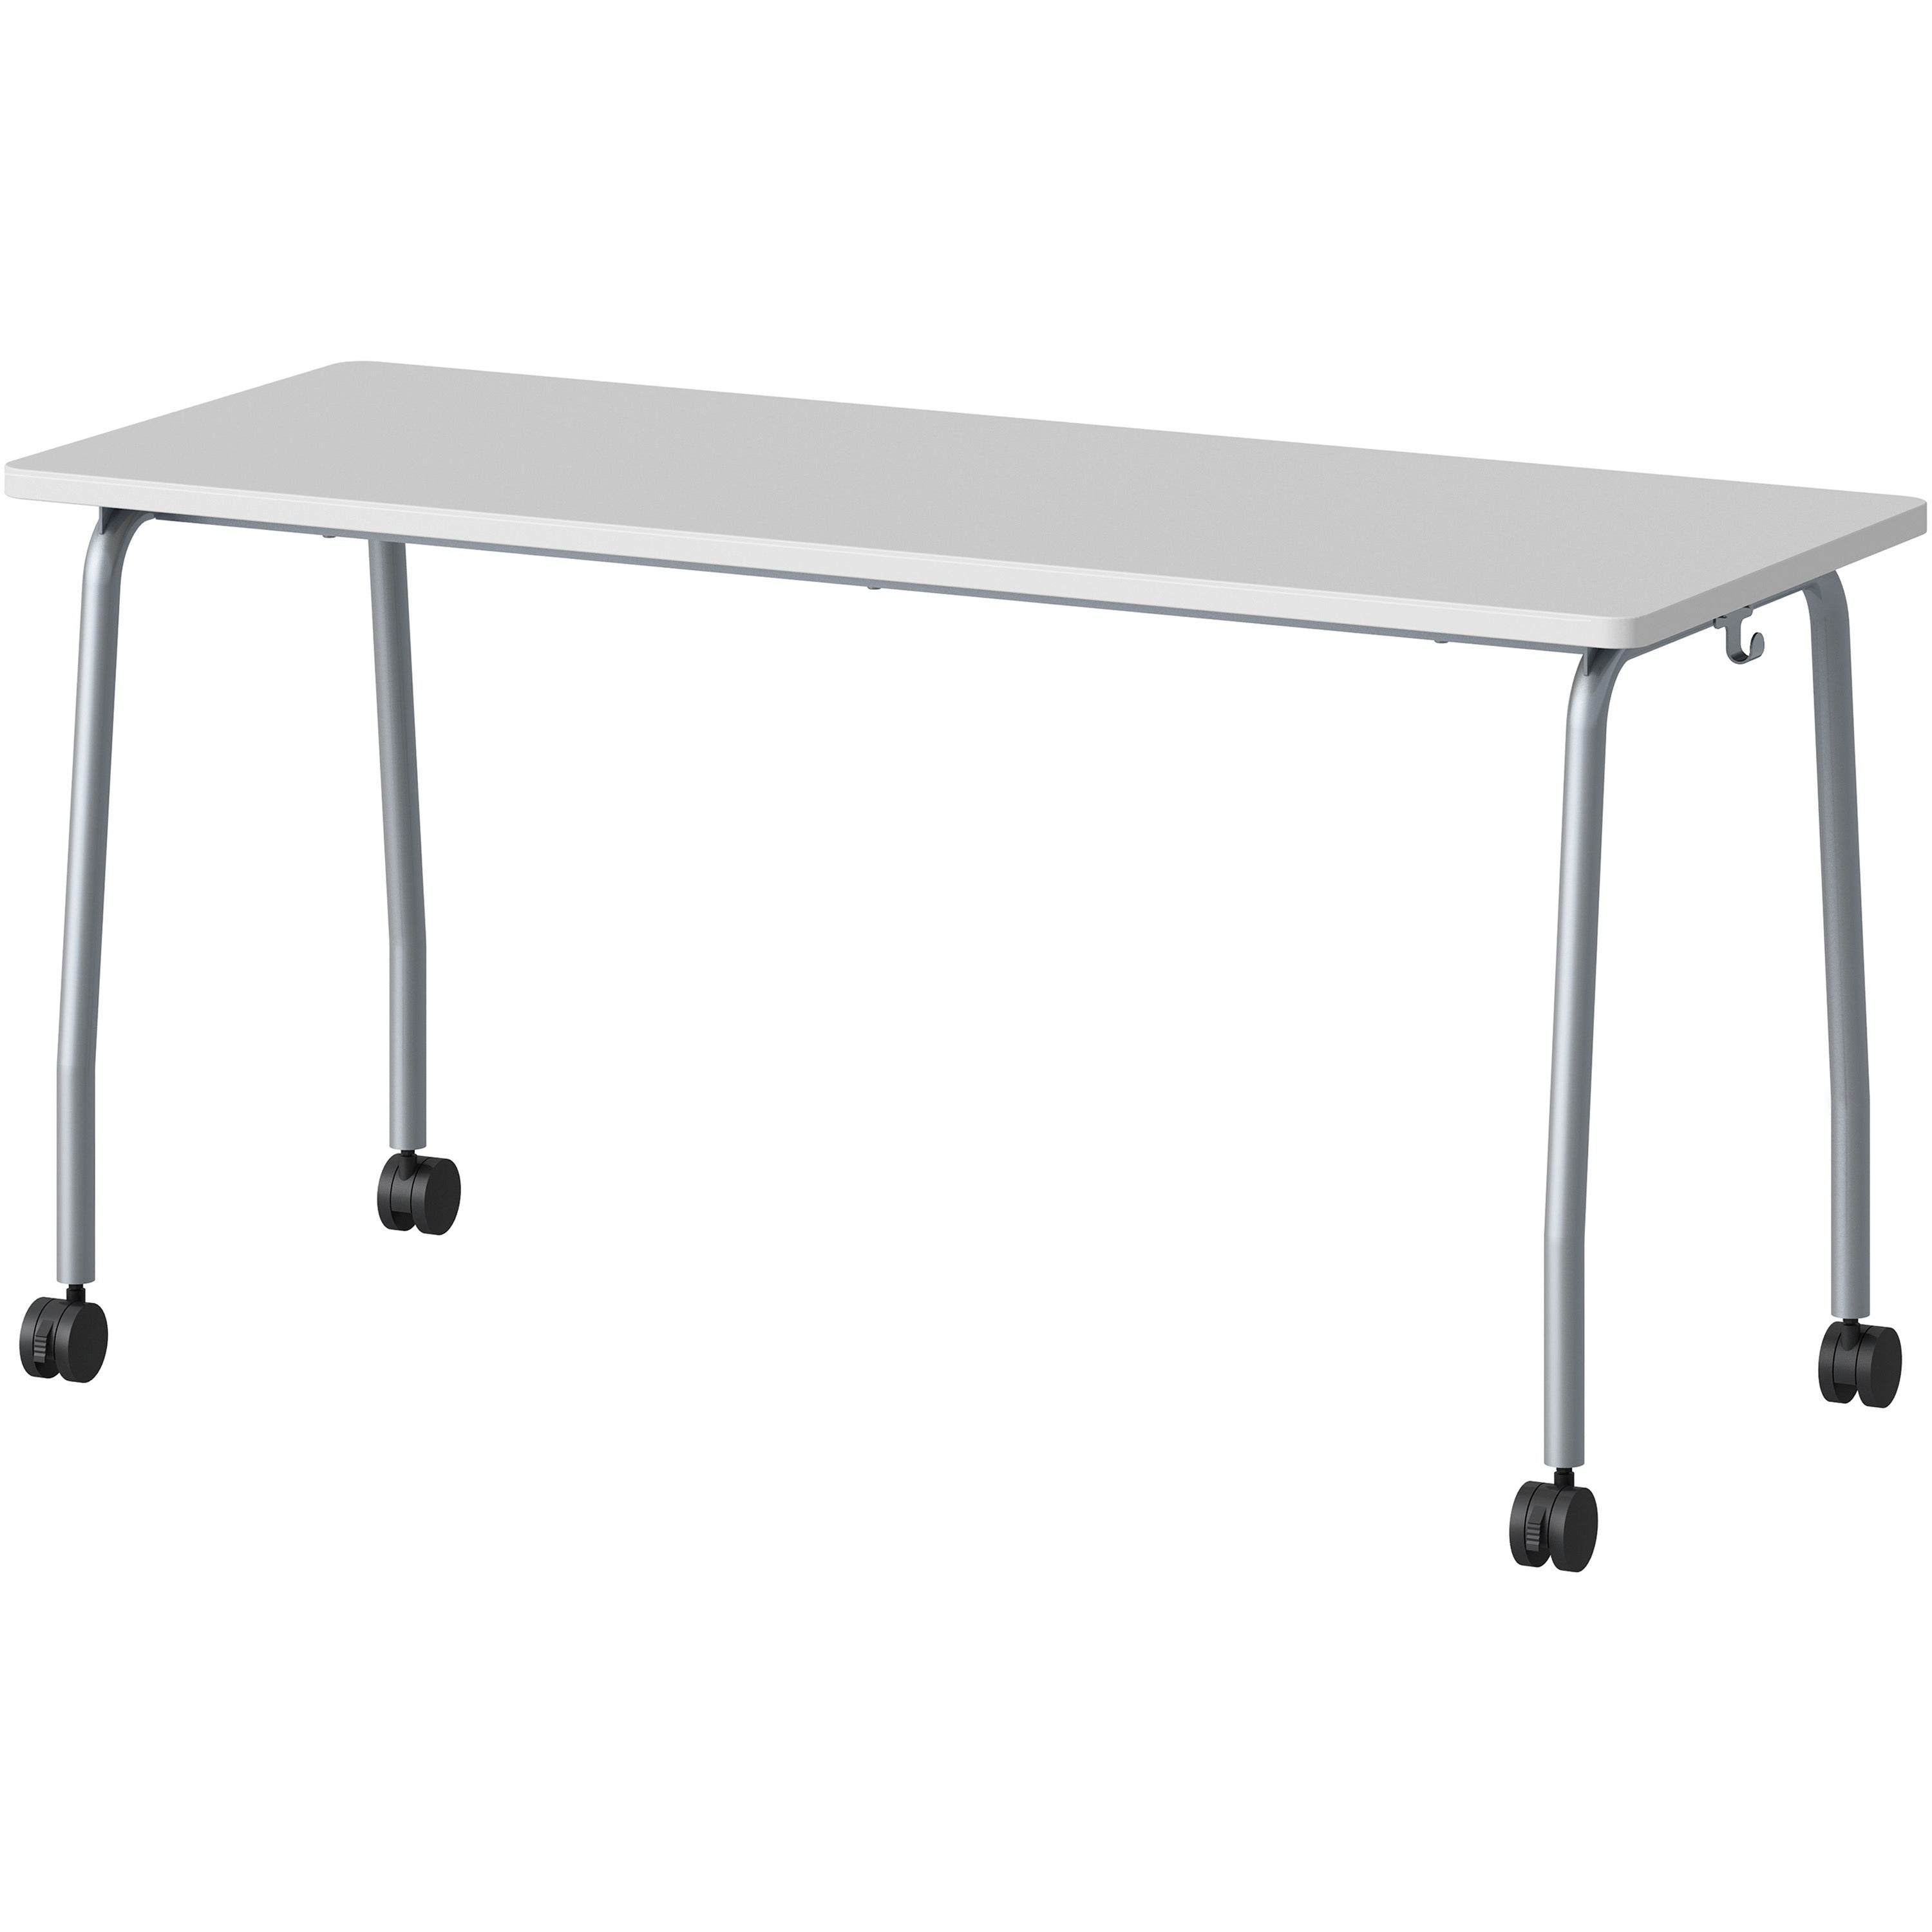 lorell-training-table-for-table-toplaminated-top-300-lb-capacity-2950-table-top-length-x-2363-table-top-width-x-1-table-top-thickness-59-height-assembly-required-gray-particleboard-top-material-1-each_llr60848 - 4